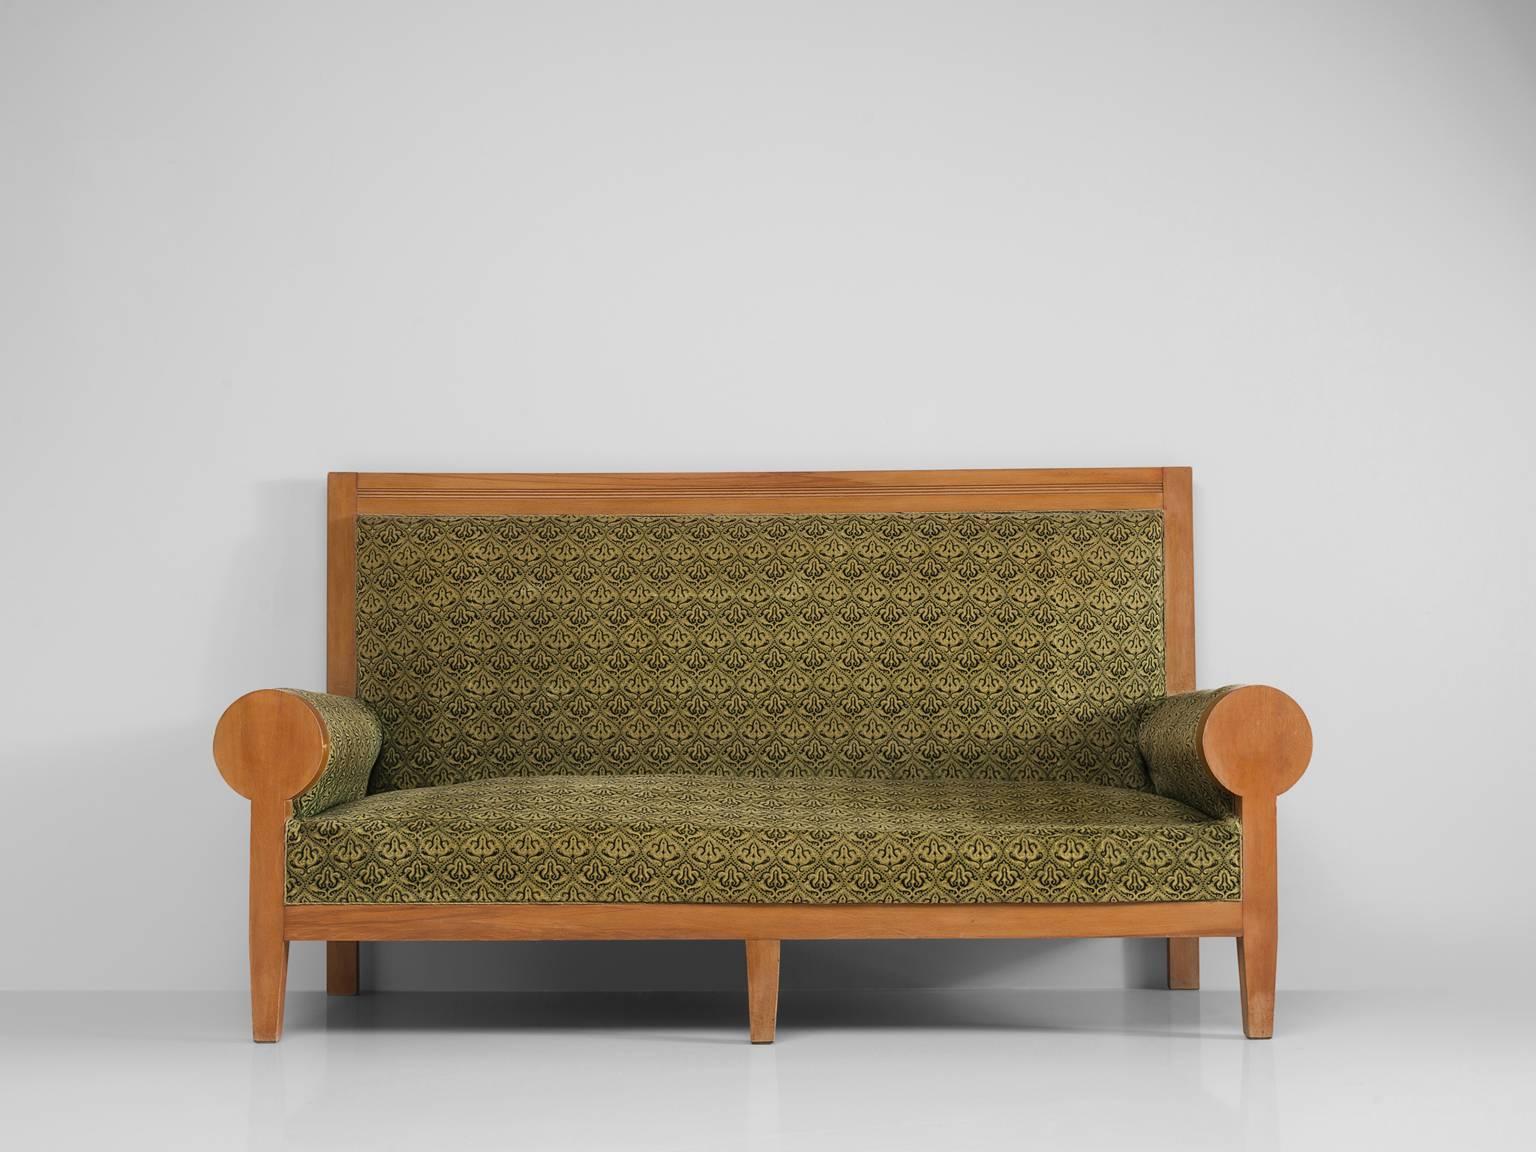 Sofa in beech and fabric, Europe, 1940s.

A stately settee in green fabric upholstery. This bench has a majestic appearance, due the high back and luxurious upholstery. The rounded armrests emphasize this royal expression. The warm colored wood